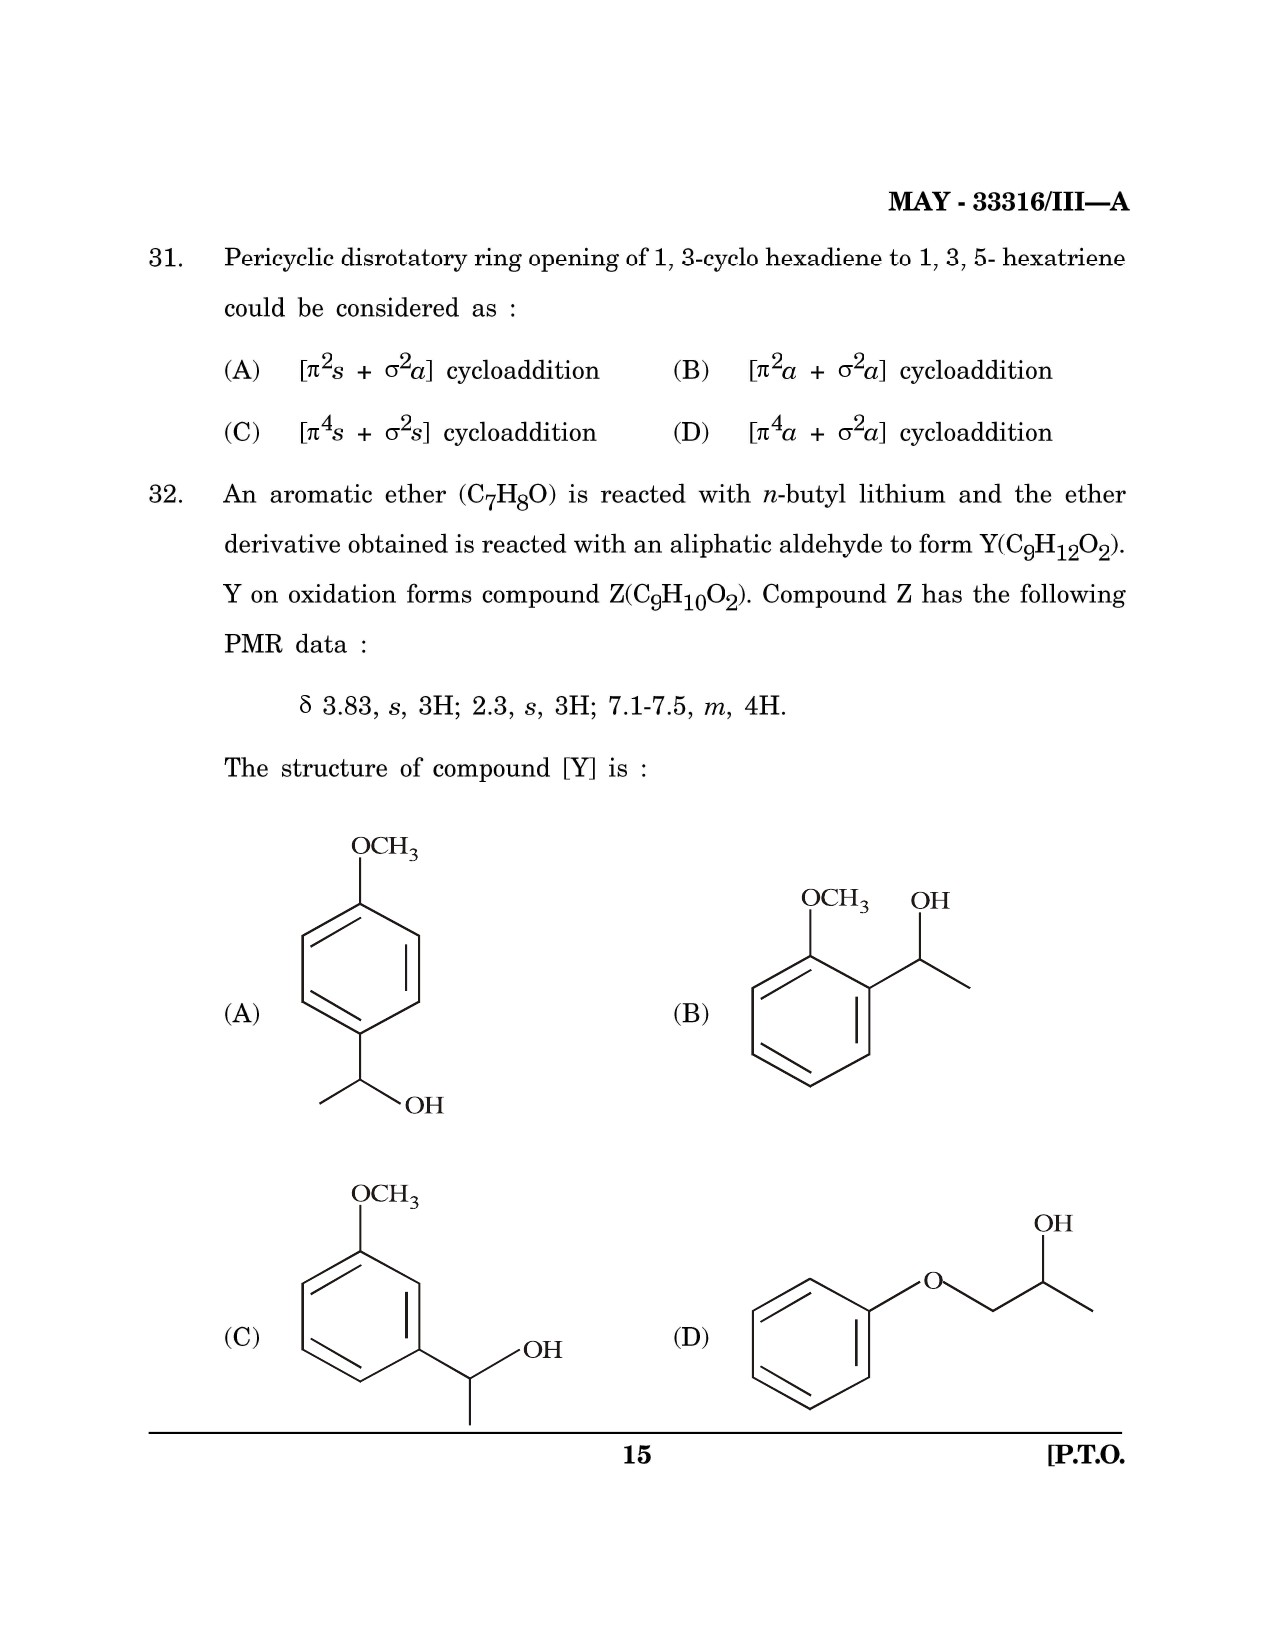 Maharashtra SET Chemical Sciences Question Paper III May 2016 14